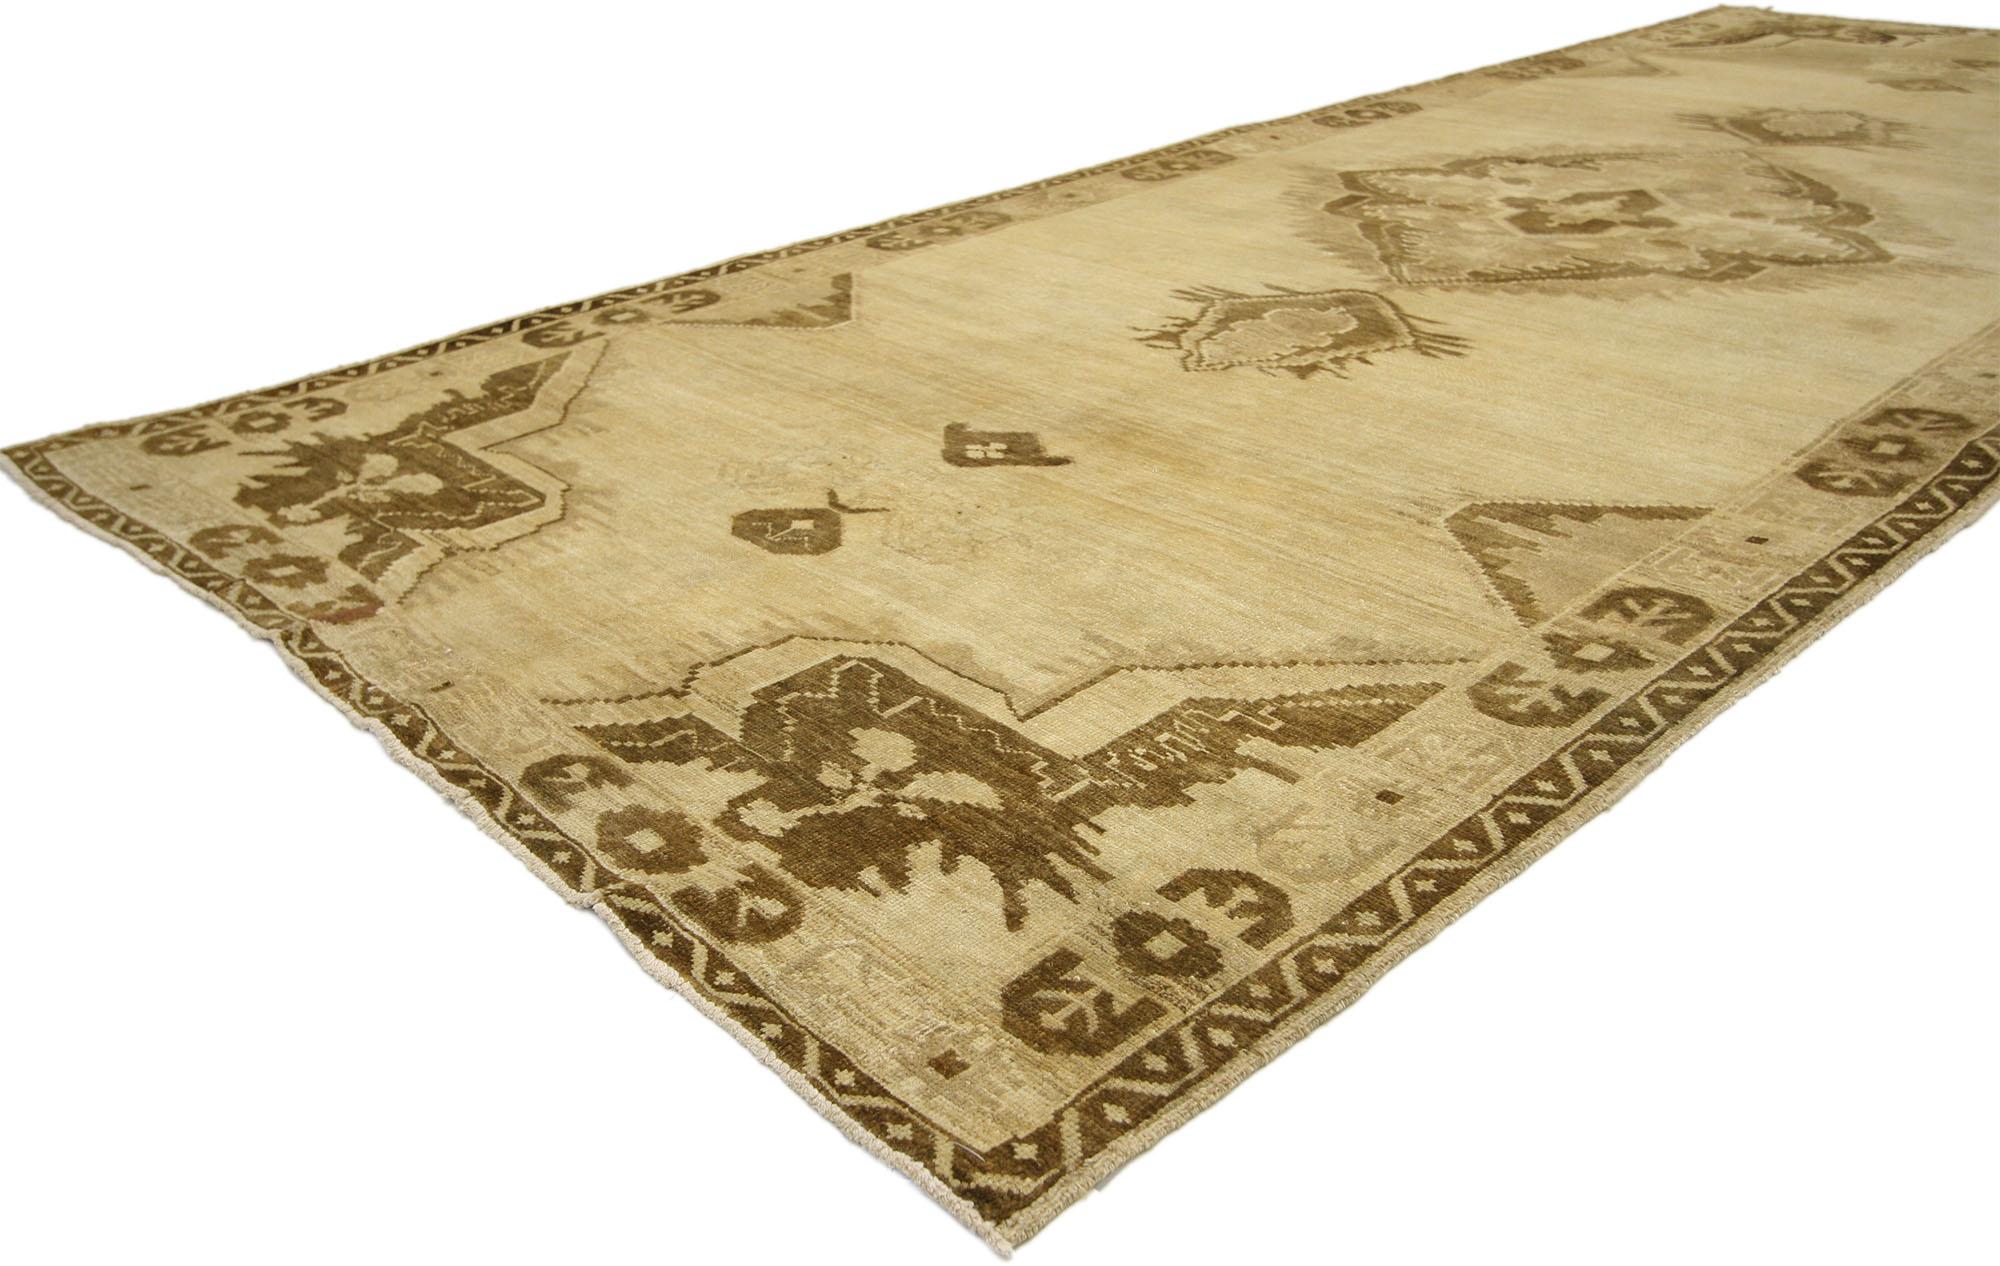 51370 vintage Turkish Oushak gallery rug with Modern Shaker Style 05'01 x 12'09. Warm and inviting, this hand-knotted wool vintage Turkish Oushak gallery rug comes beautifully showcases muted earth tones and a modern Shaker style. Immersed in